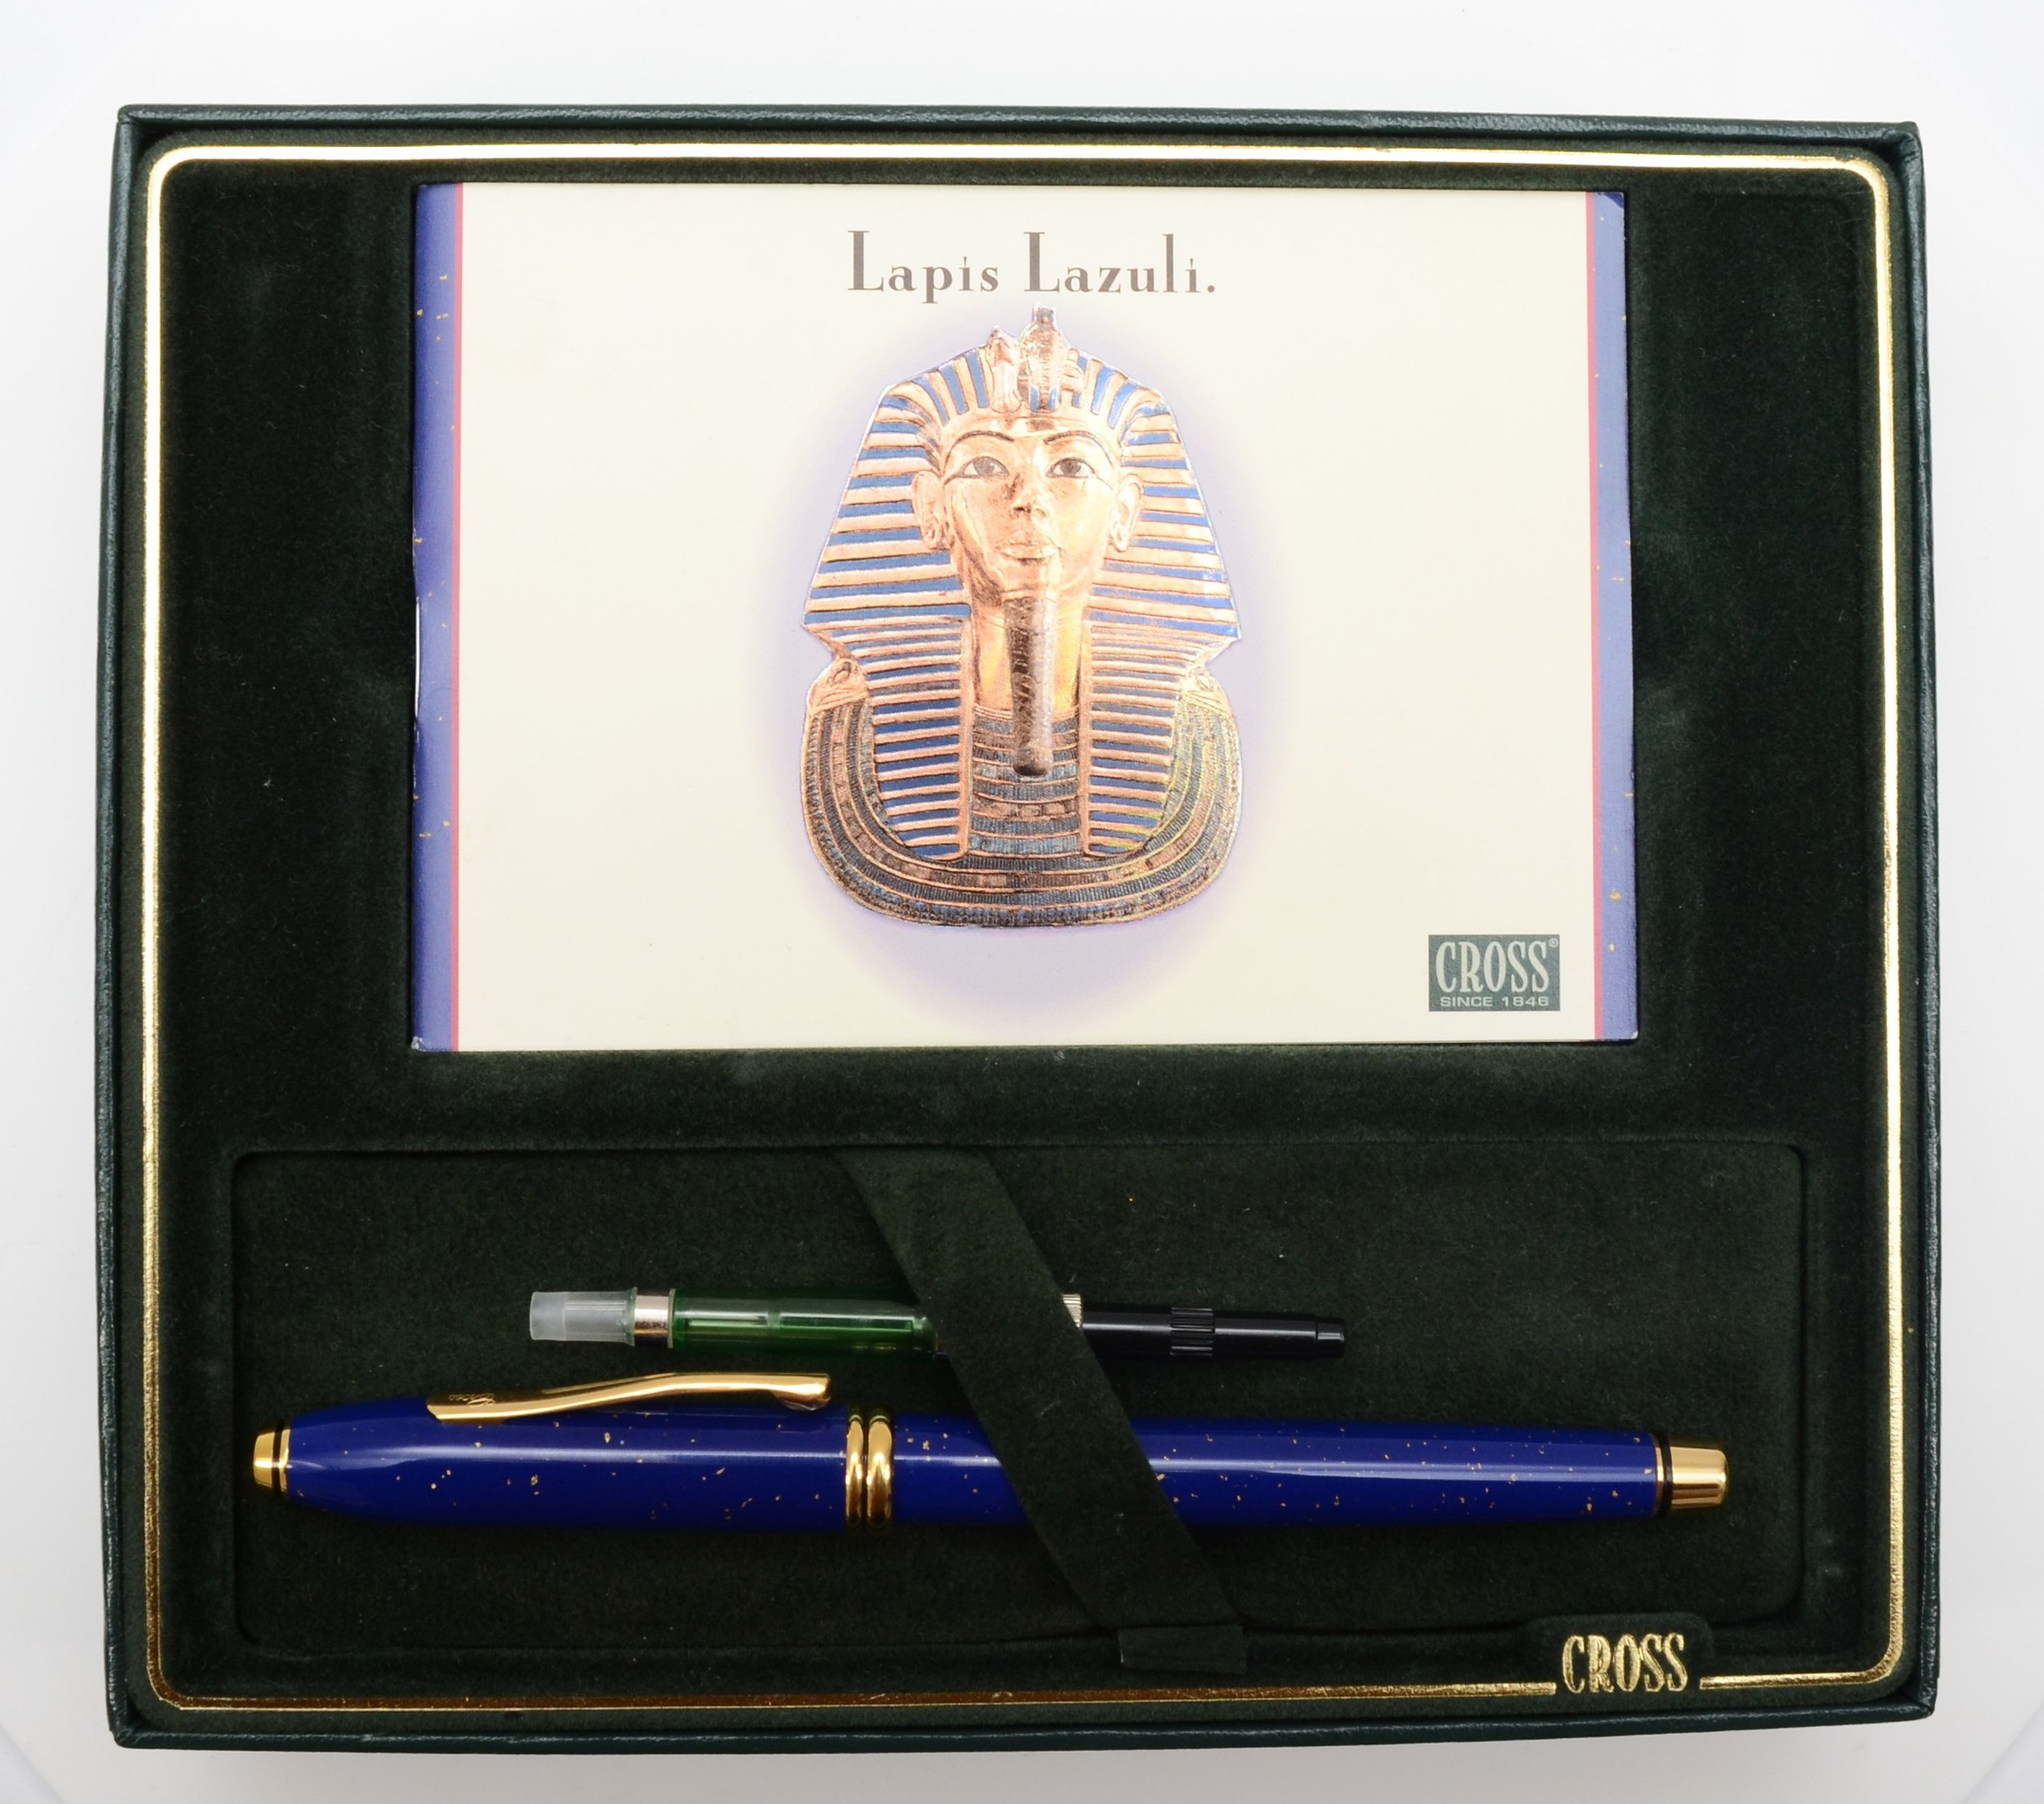 Cross, a limited edition Lapis Lazuli fountain pen, c.2002, 18K gold nib, with cartridge and plunger